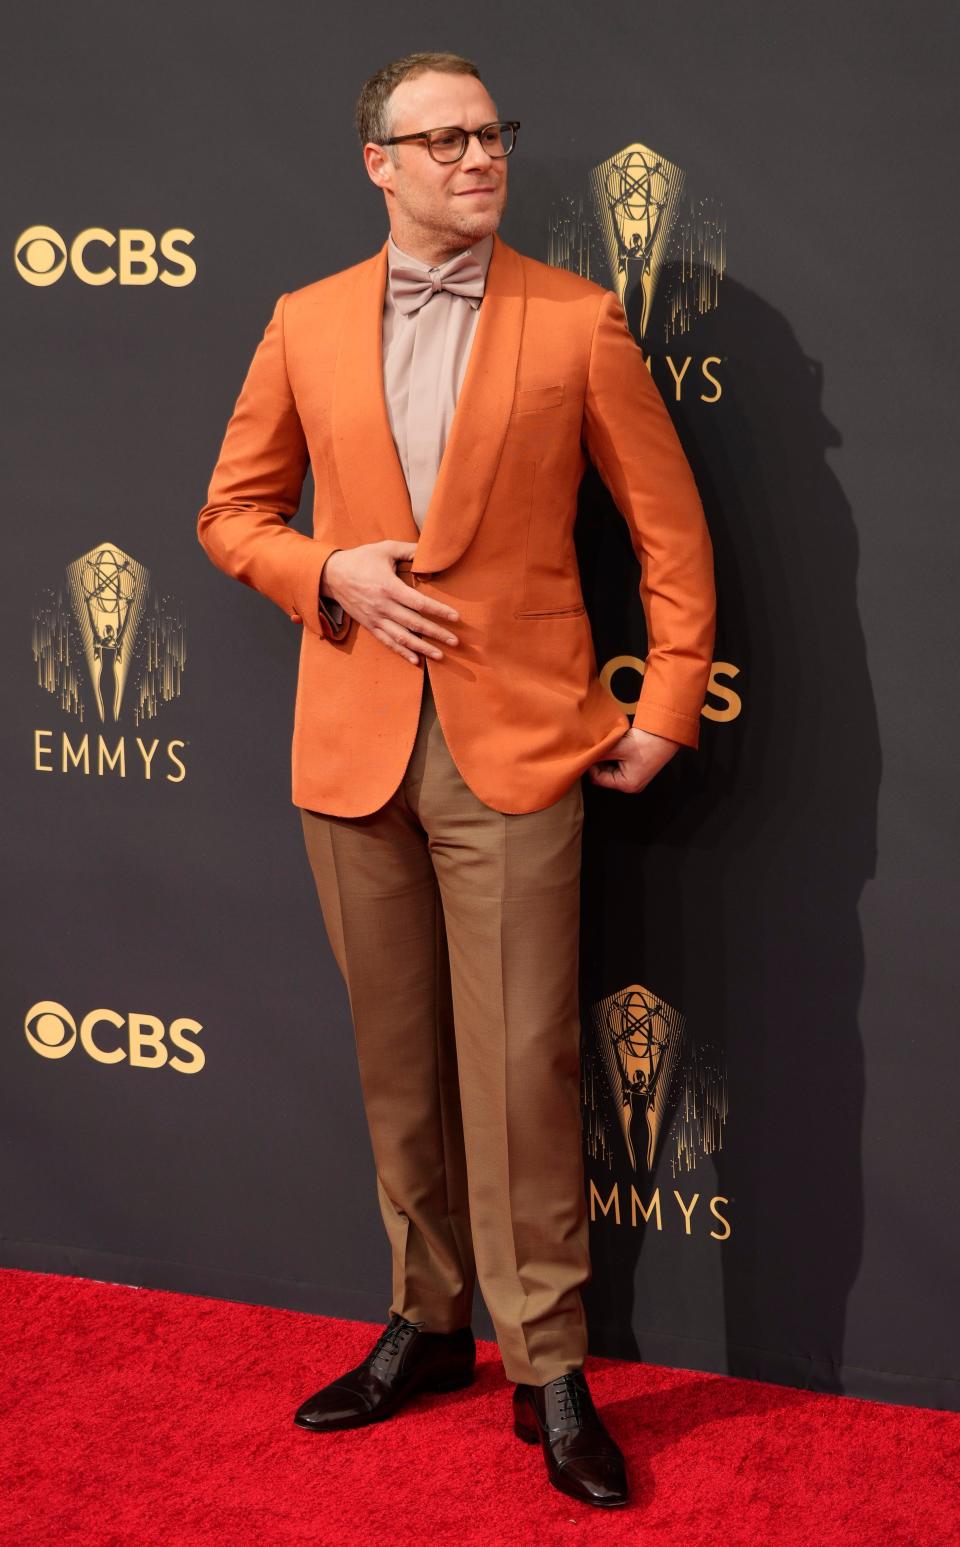 Seth Rogen stops on the red carpet before presenting at Sundays 73rd Emmy Awards in Los Angeles.